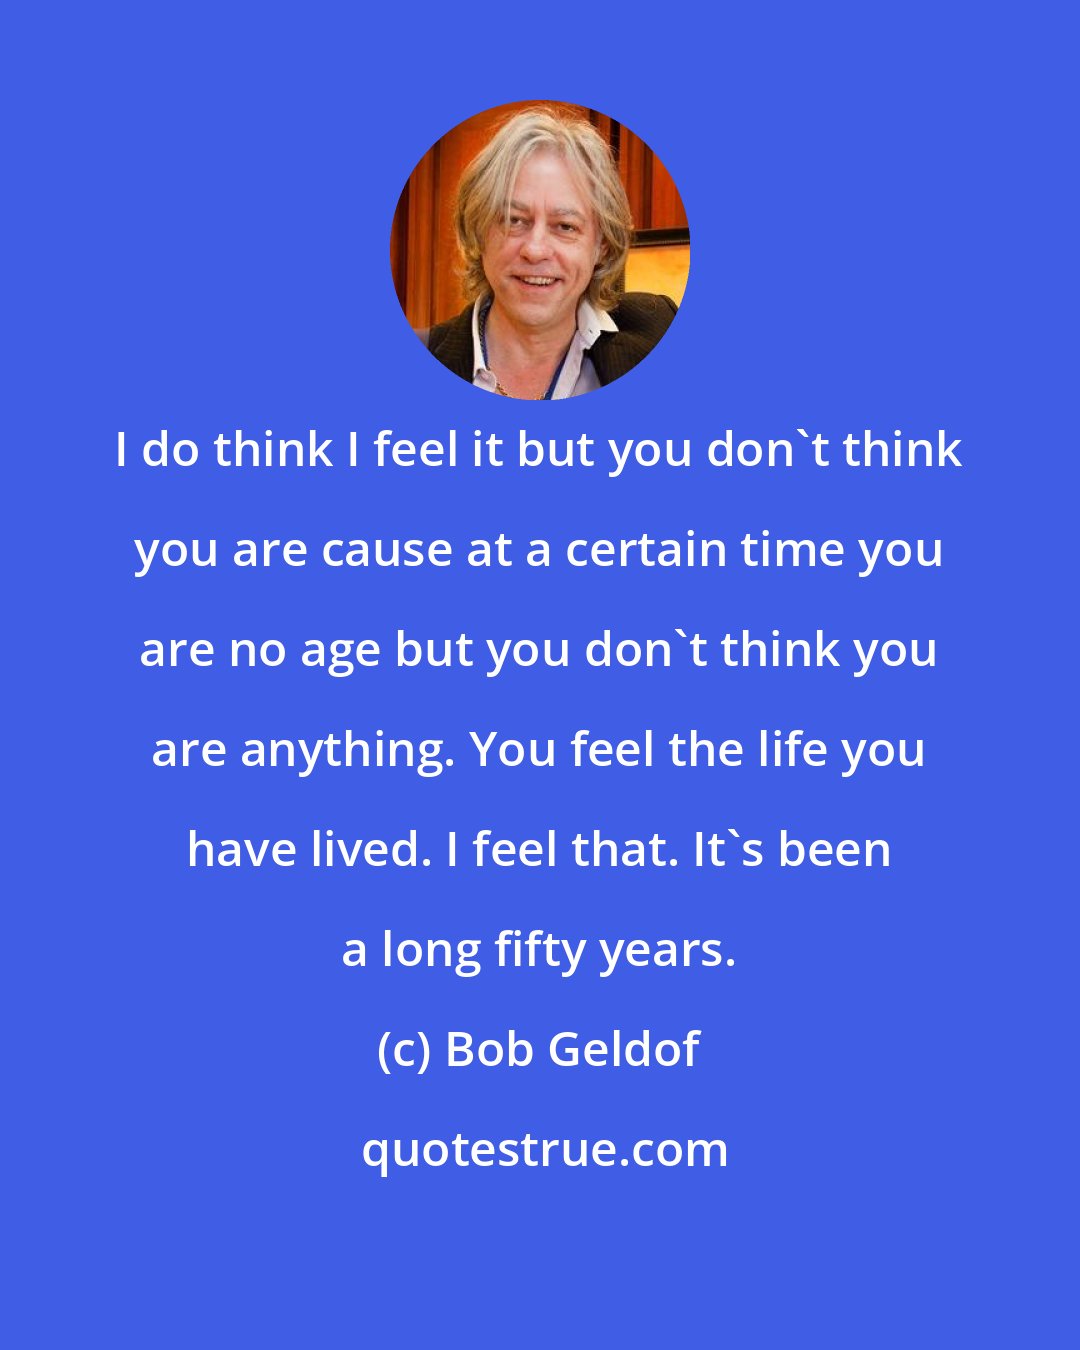 Bob Geldof: I do think I feel it but you don't think you are cause at a certain time you are no age but you don't think you are anything. You feel the life you have lived. I feel that. It's been a long fifty years.